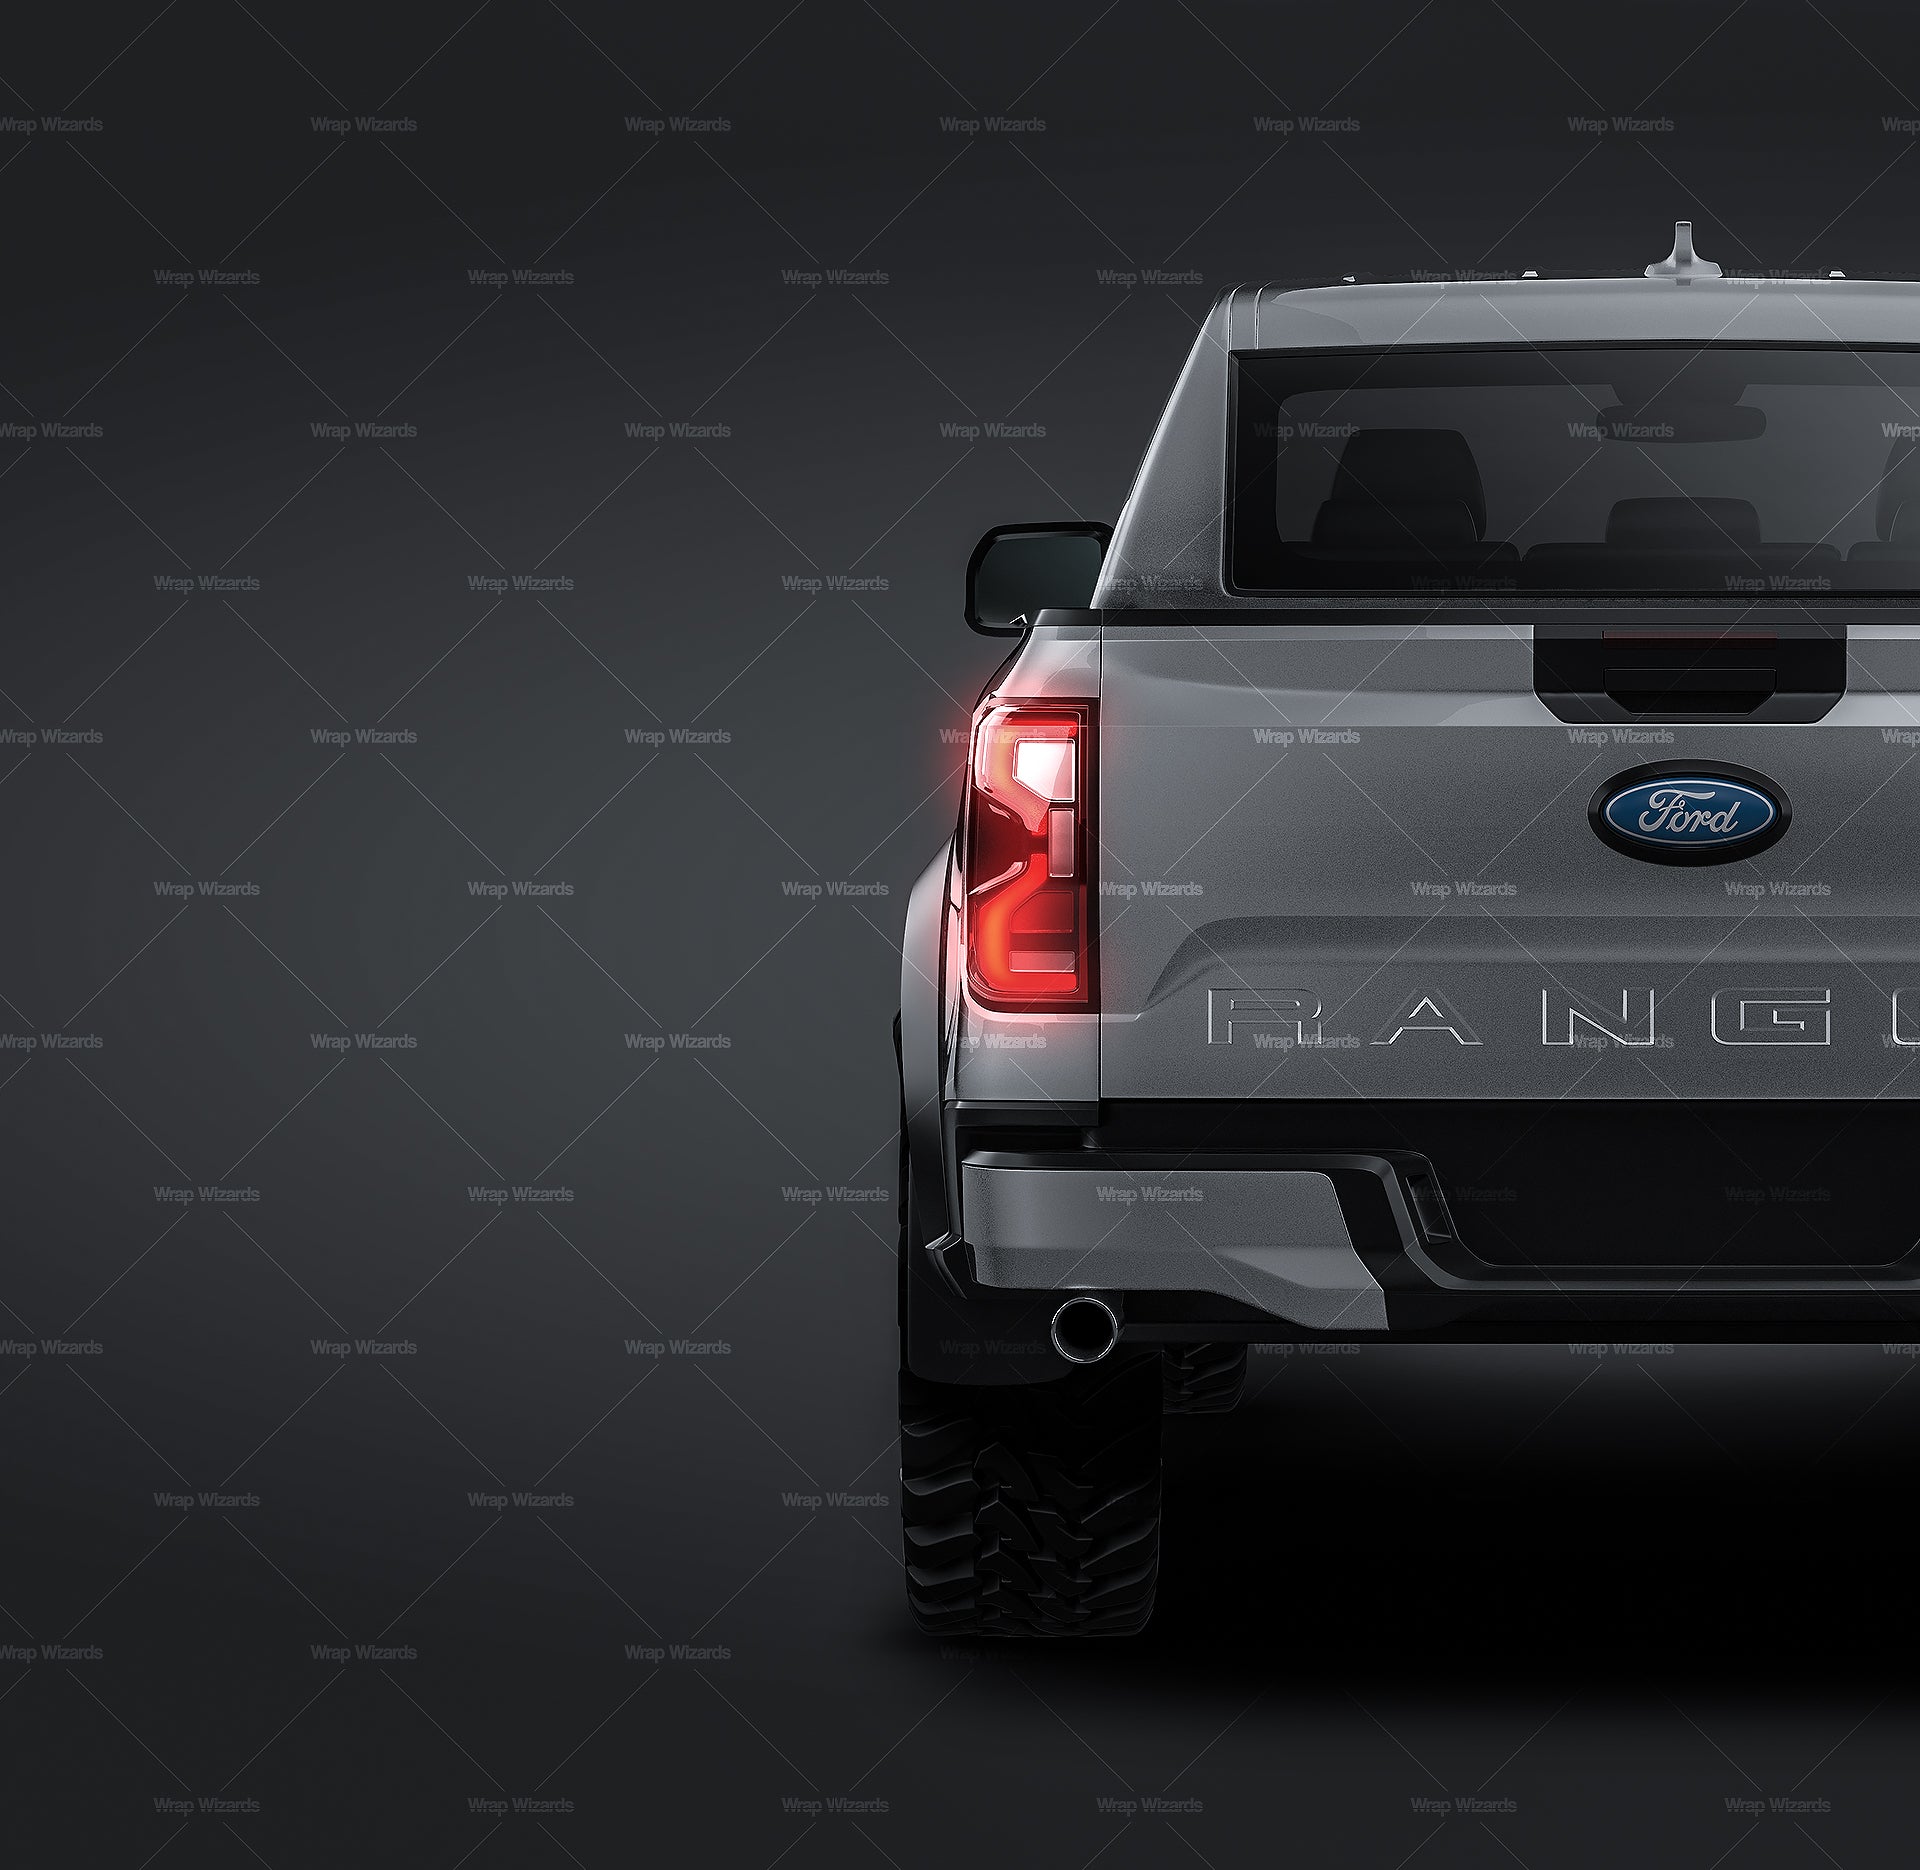 Ford F-150 Ranger Raptor 2023 glossy finish - all sides Car Mockup Template.psd